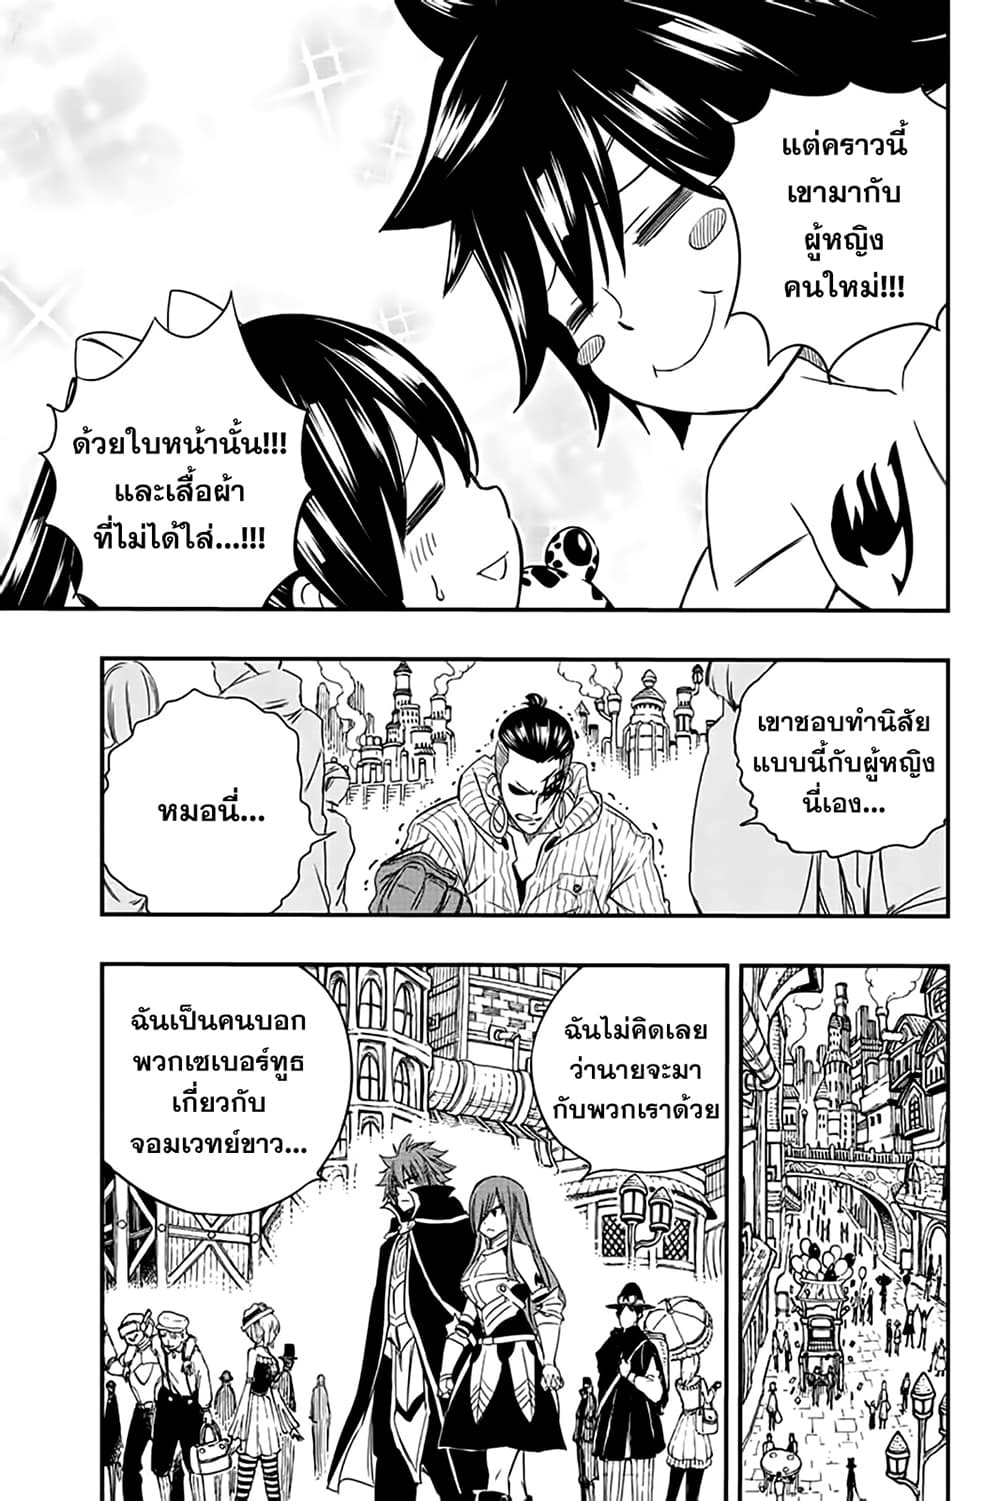 Fairy Tail 100 Years Quest à¸à¸­à¸à¸à¸µà¹ 126 (11)